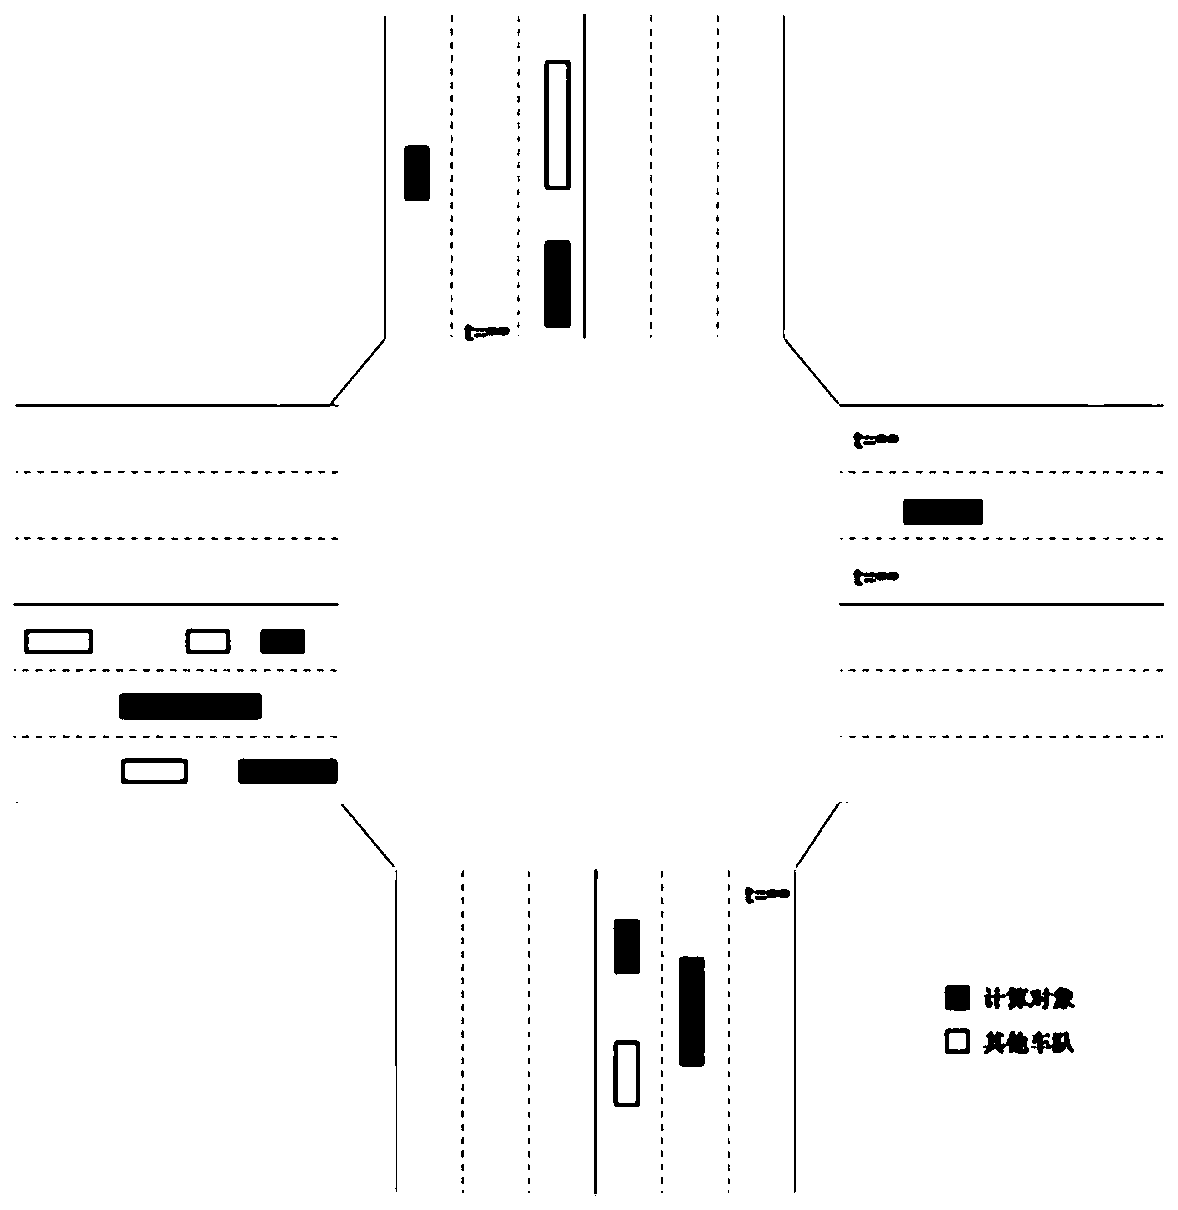 A self-organizing control method for intersections for networked autonomous vehicles